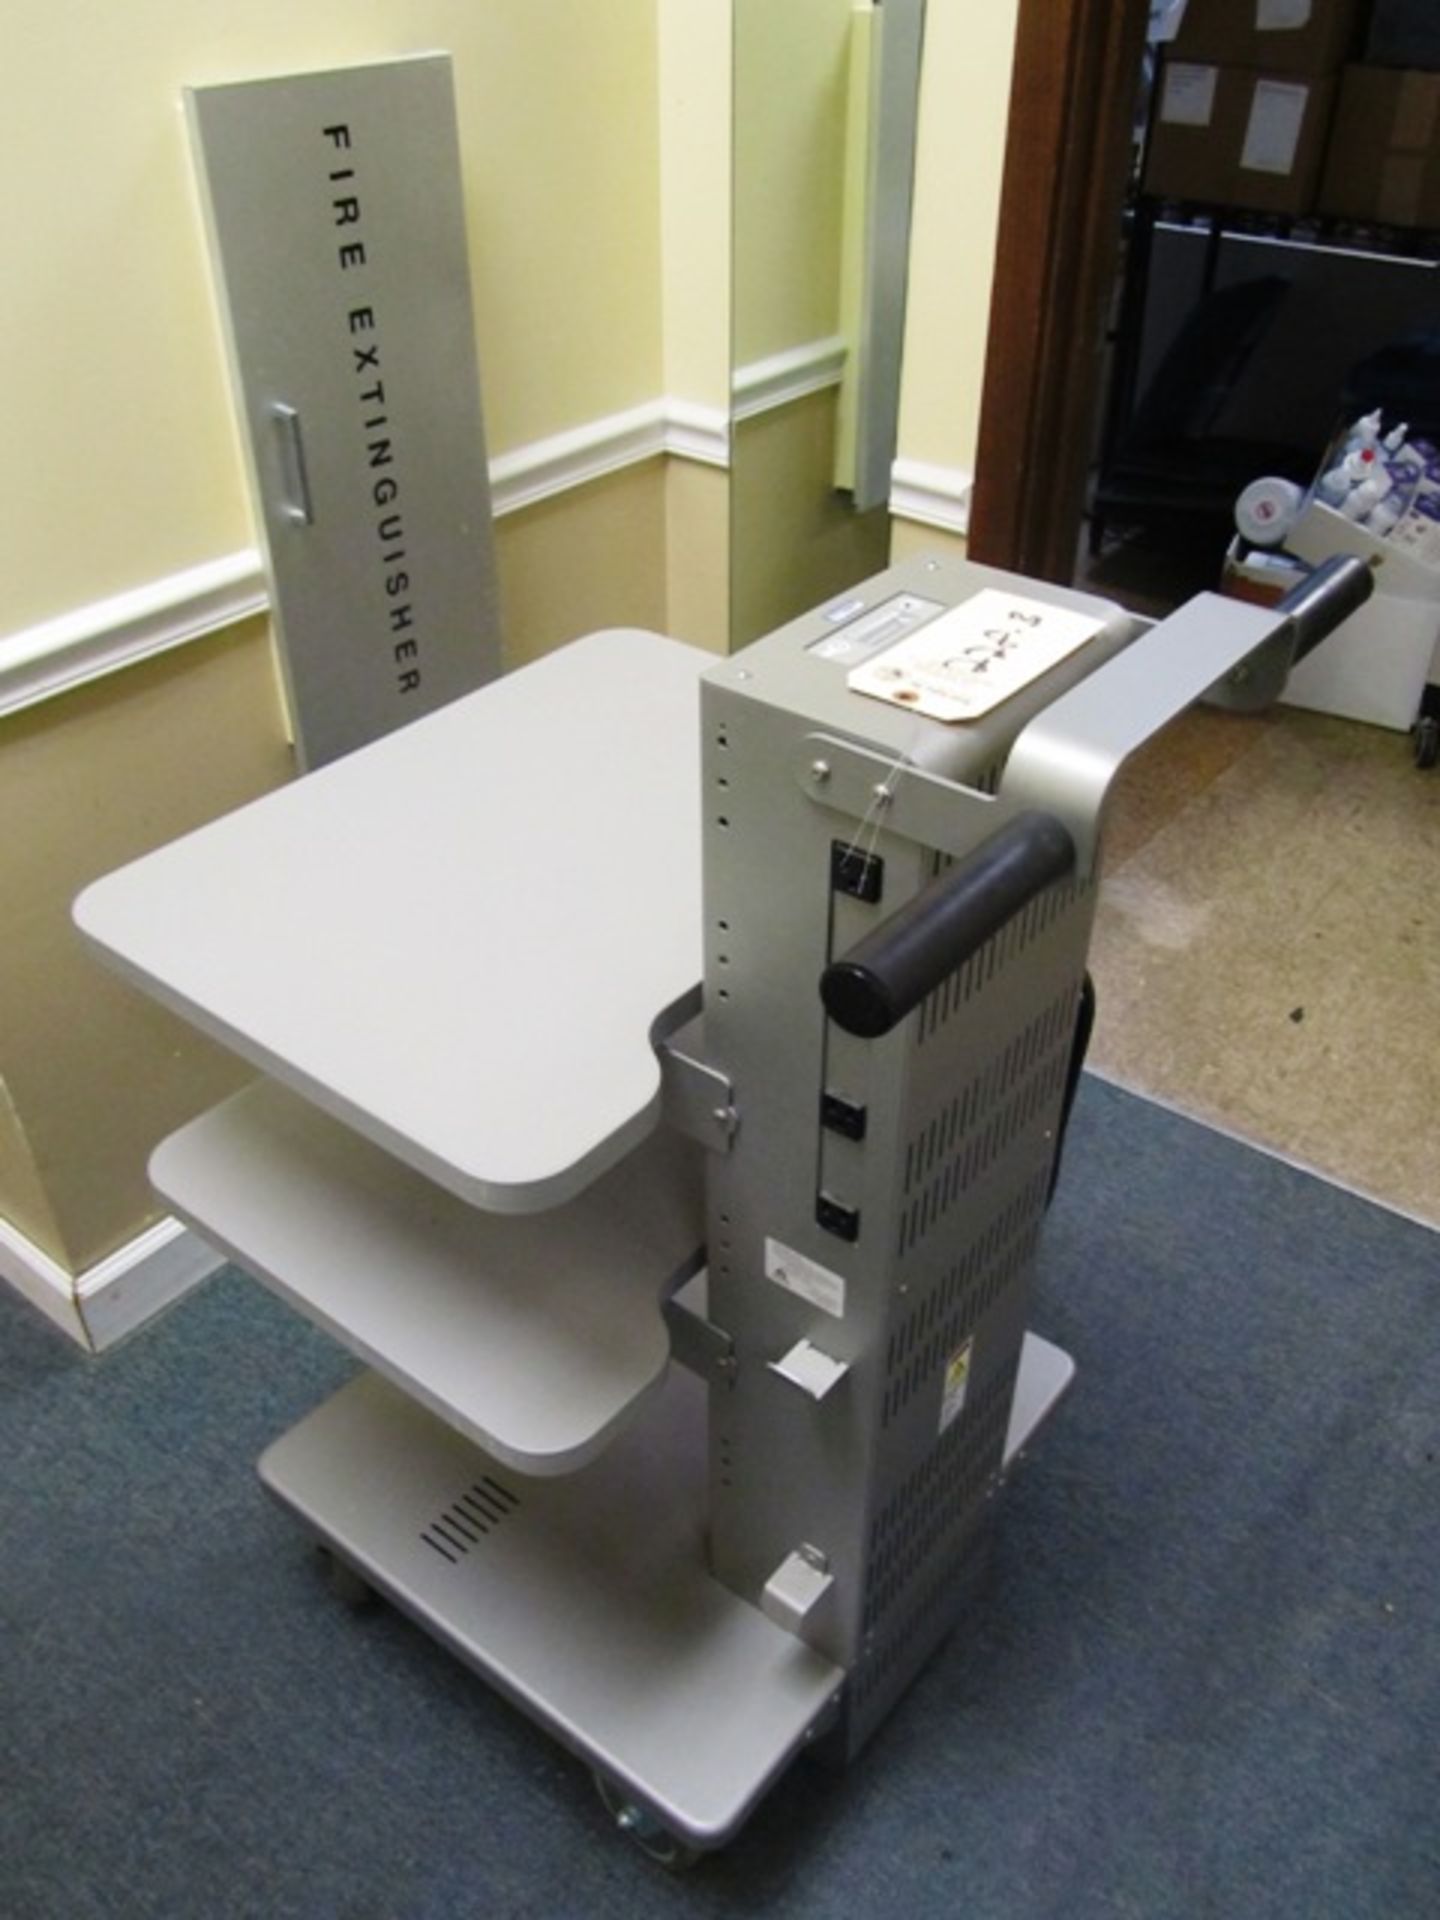 Anthro Portable Power Supply Cart, located Oak Lawn, IL